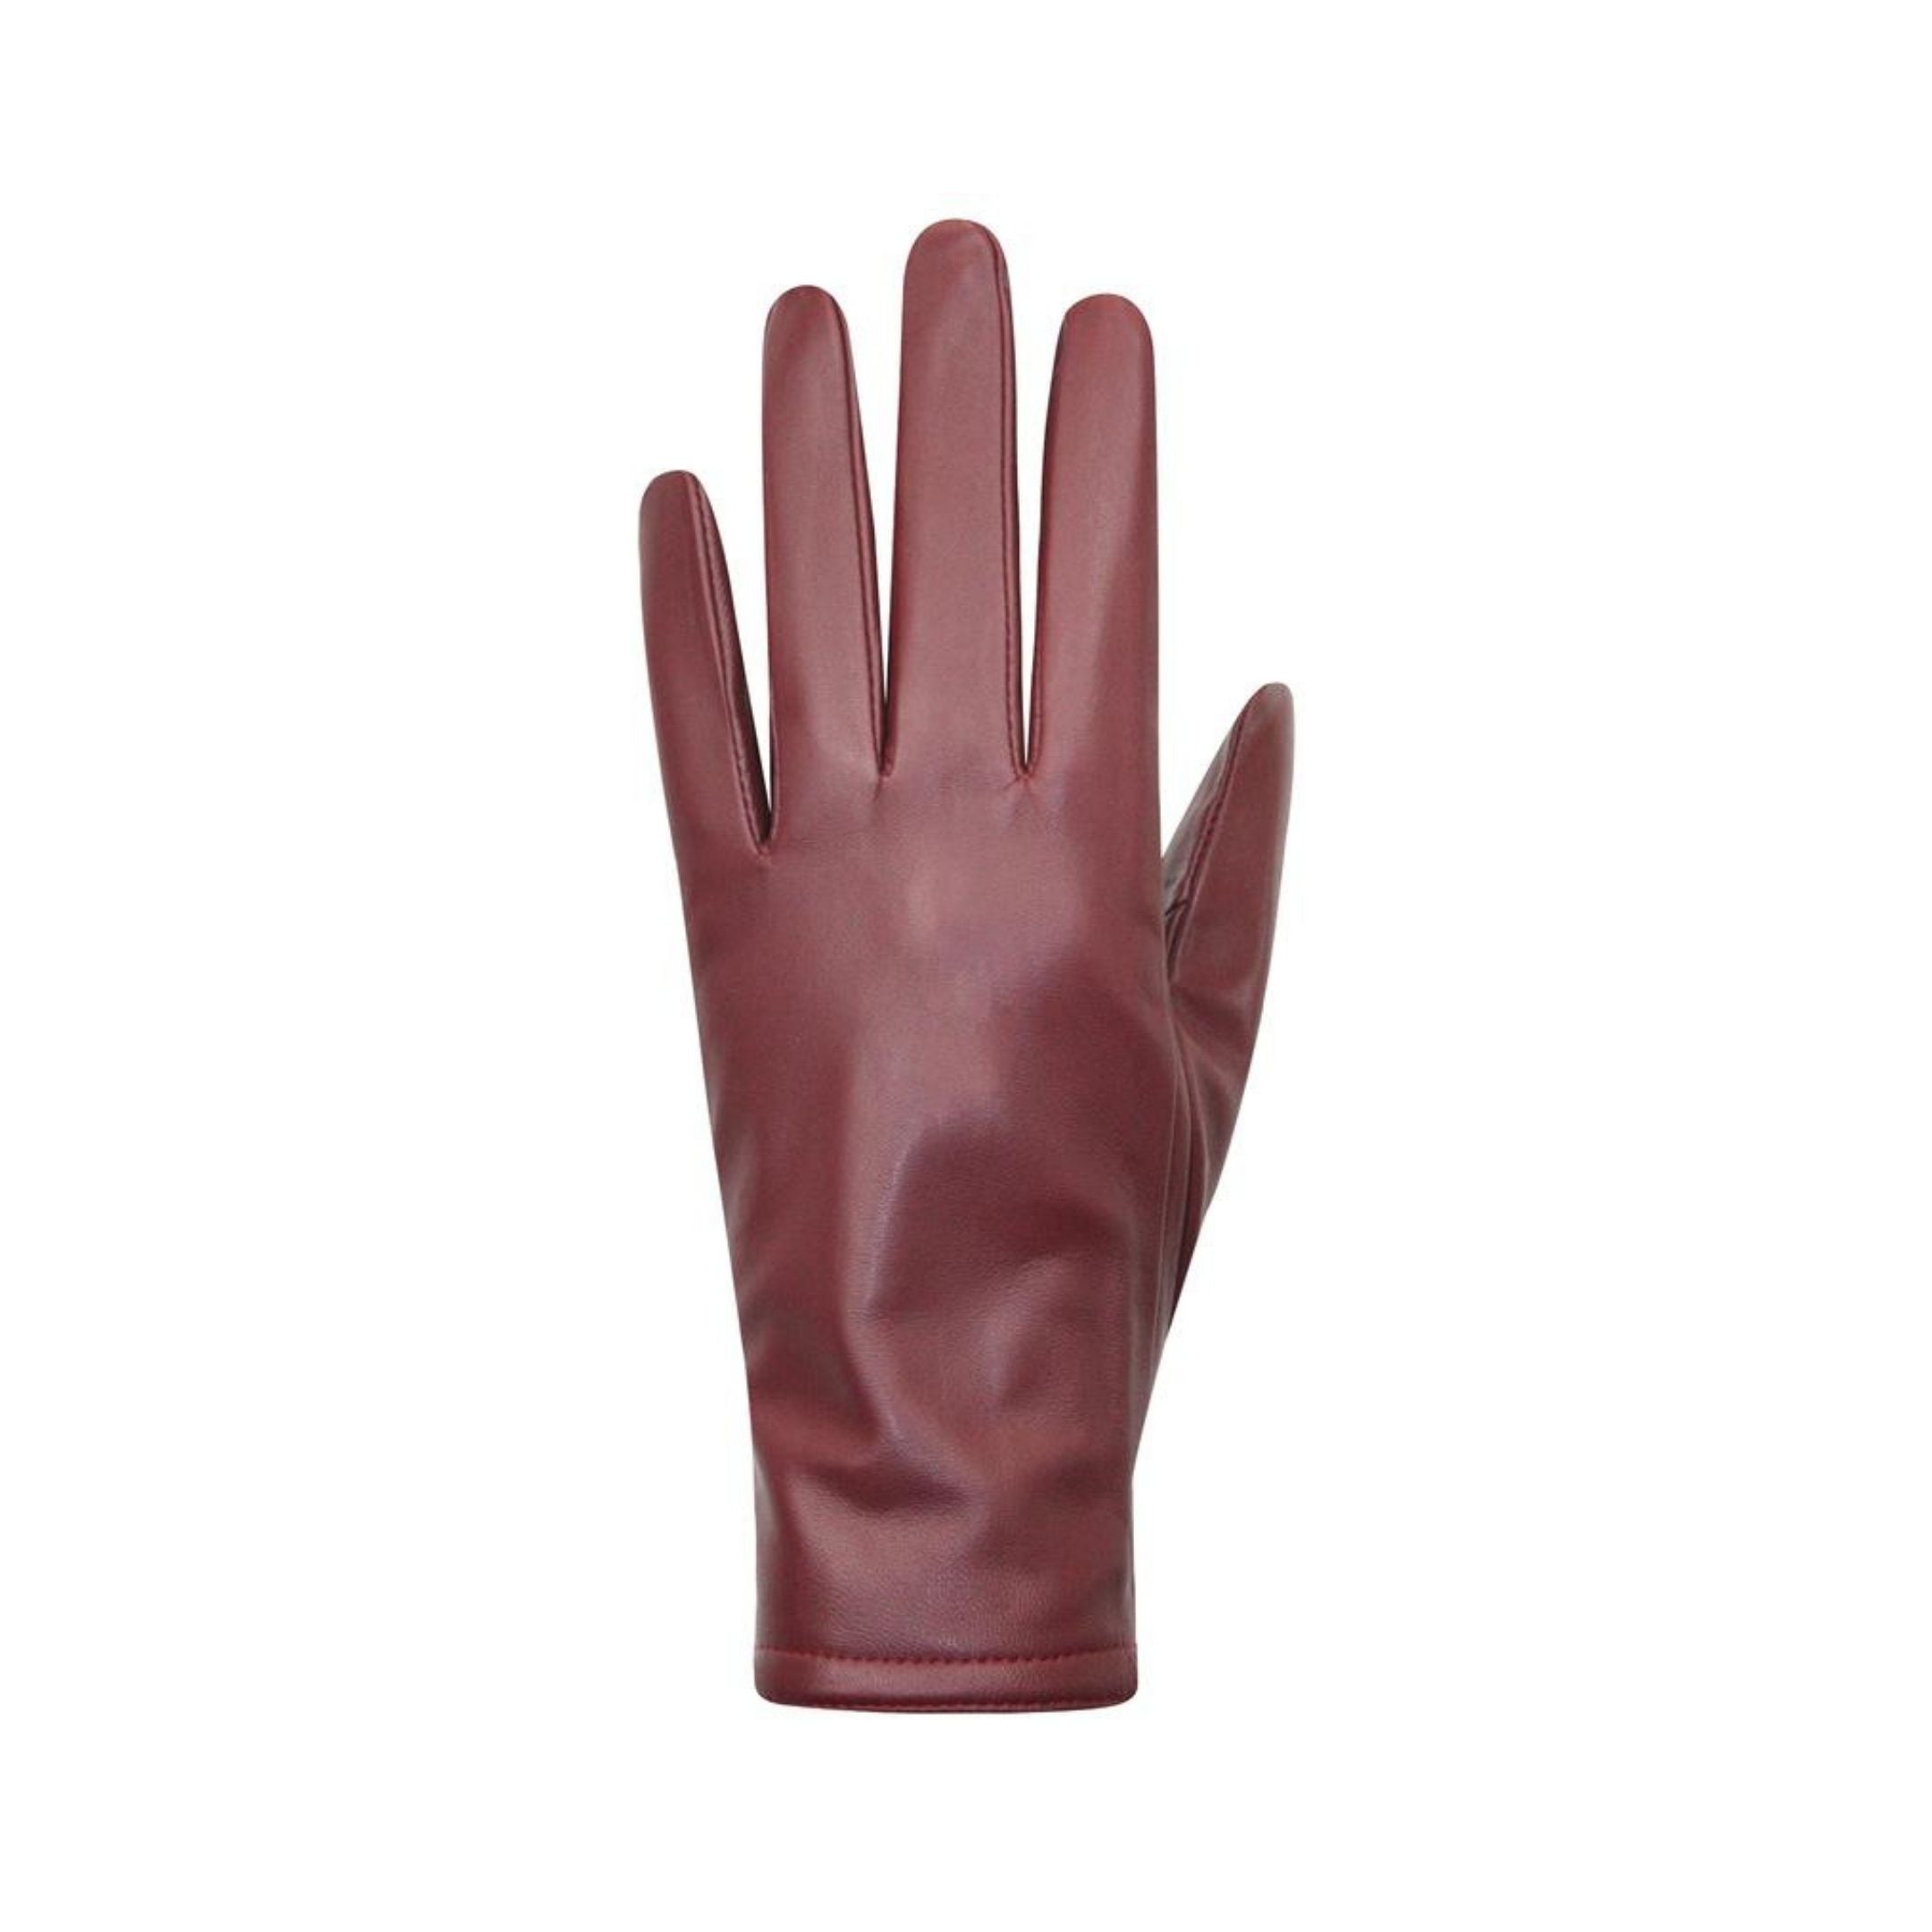 Simple burgundy leather finger mitts